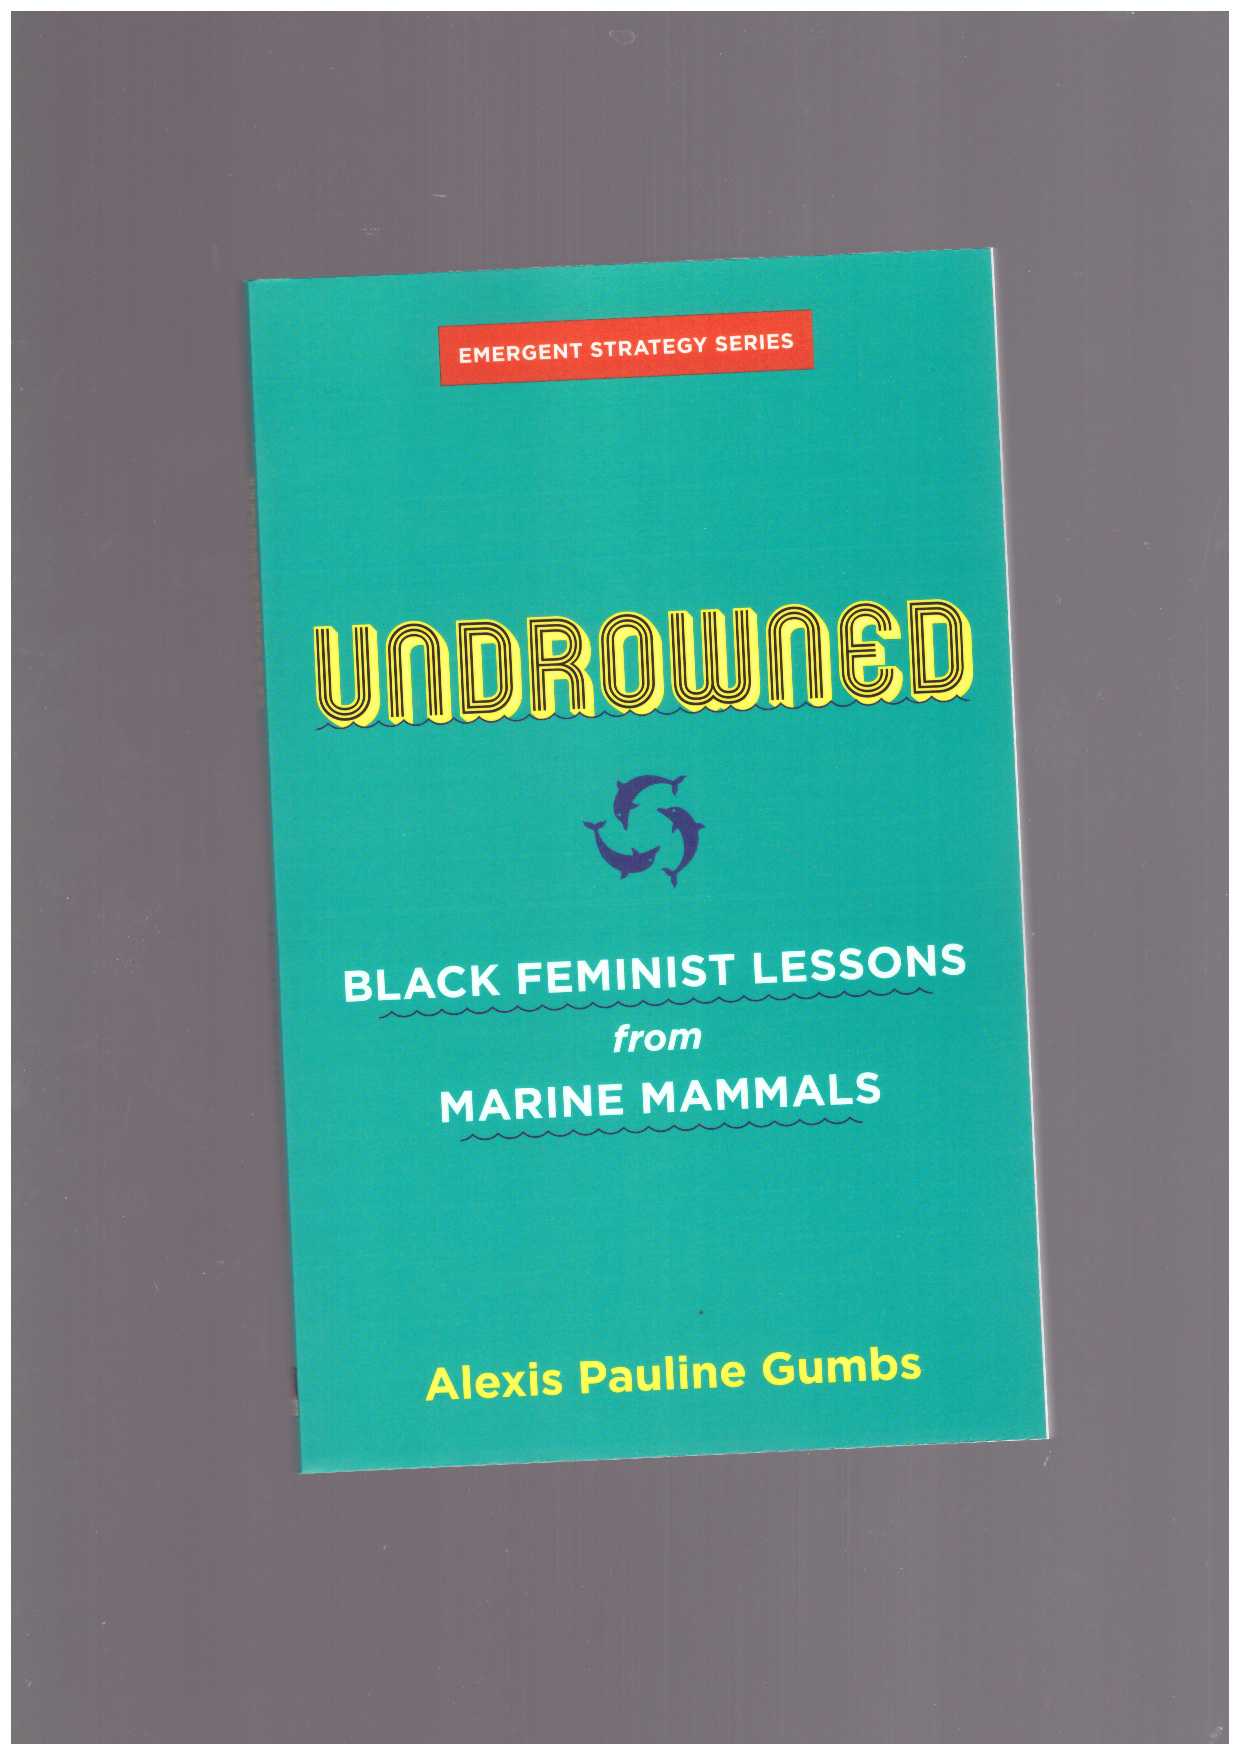 GUMBS, Alexis Pauline - Undrowned : Black feminist lessons from Marine Mammals